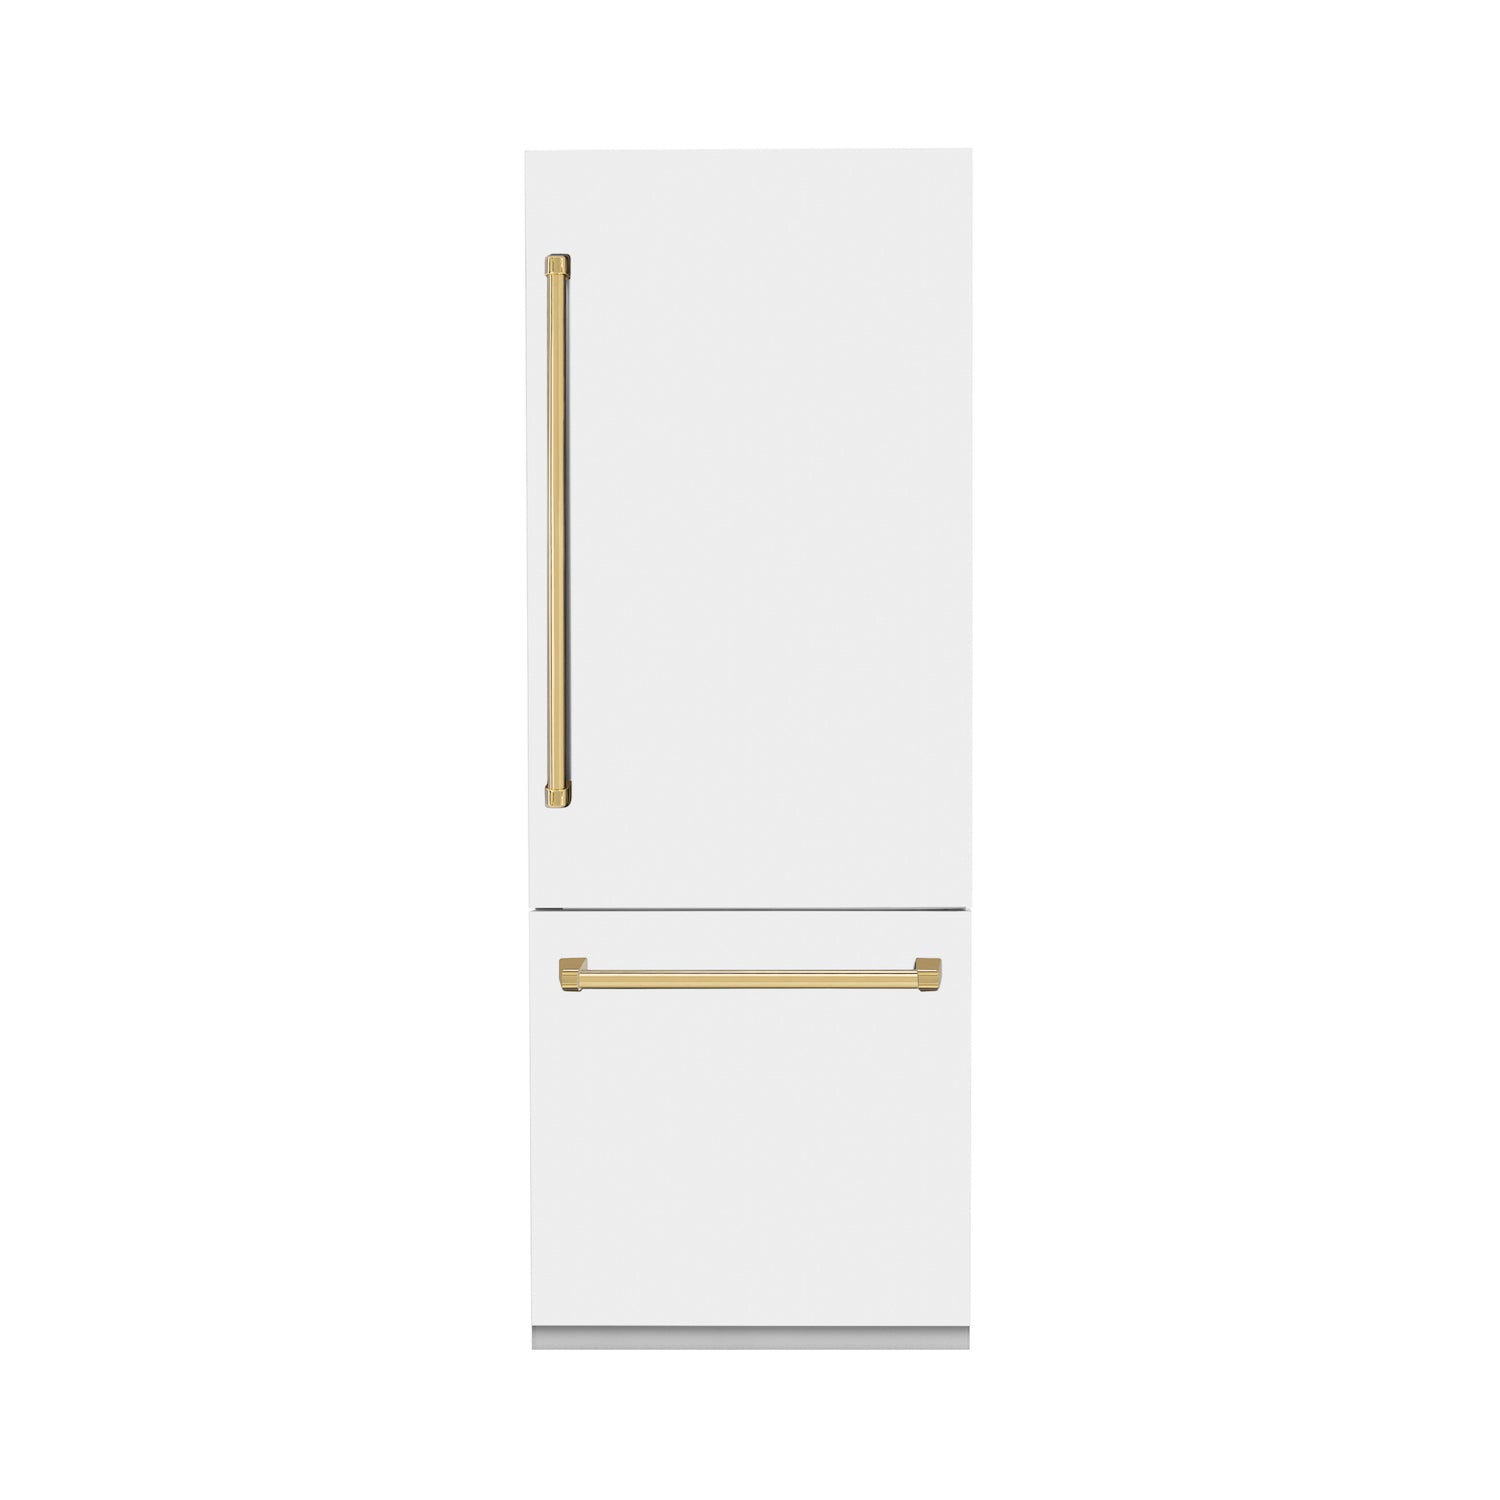 ZLINE 30" Autograph Edition 16.1 cu. ft. Built-in 2-Door Bottom Freezer Refrigerator with Internal Water and Ice Dispenser in White Matte with Gold Accents (RBIVZ-WM-30-G)